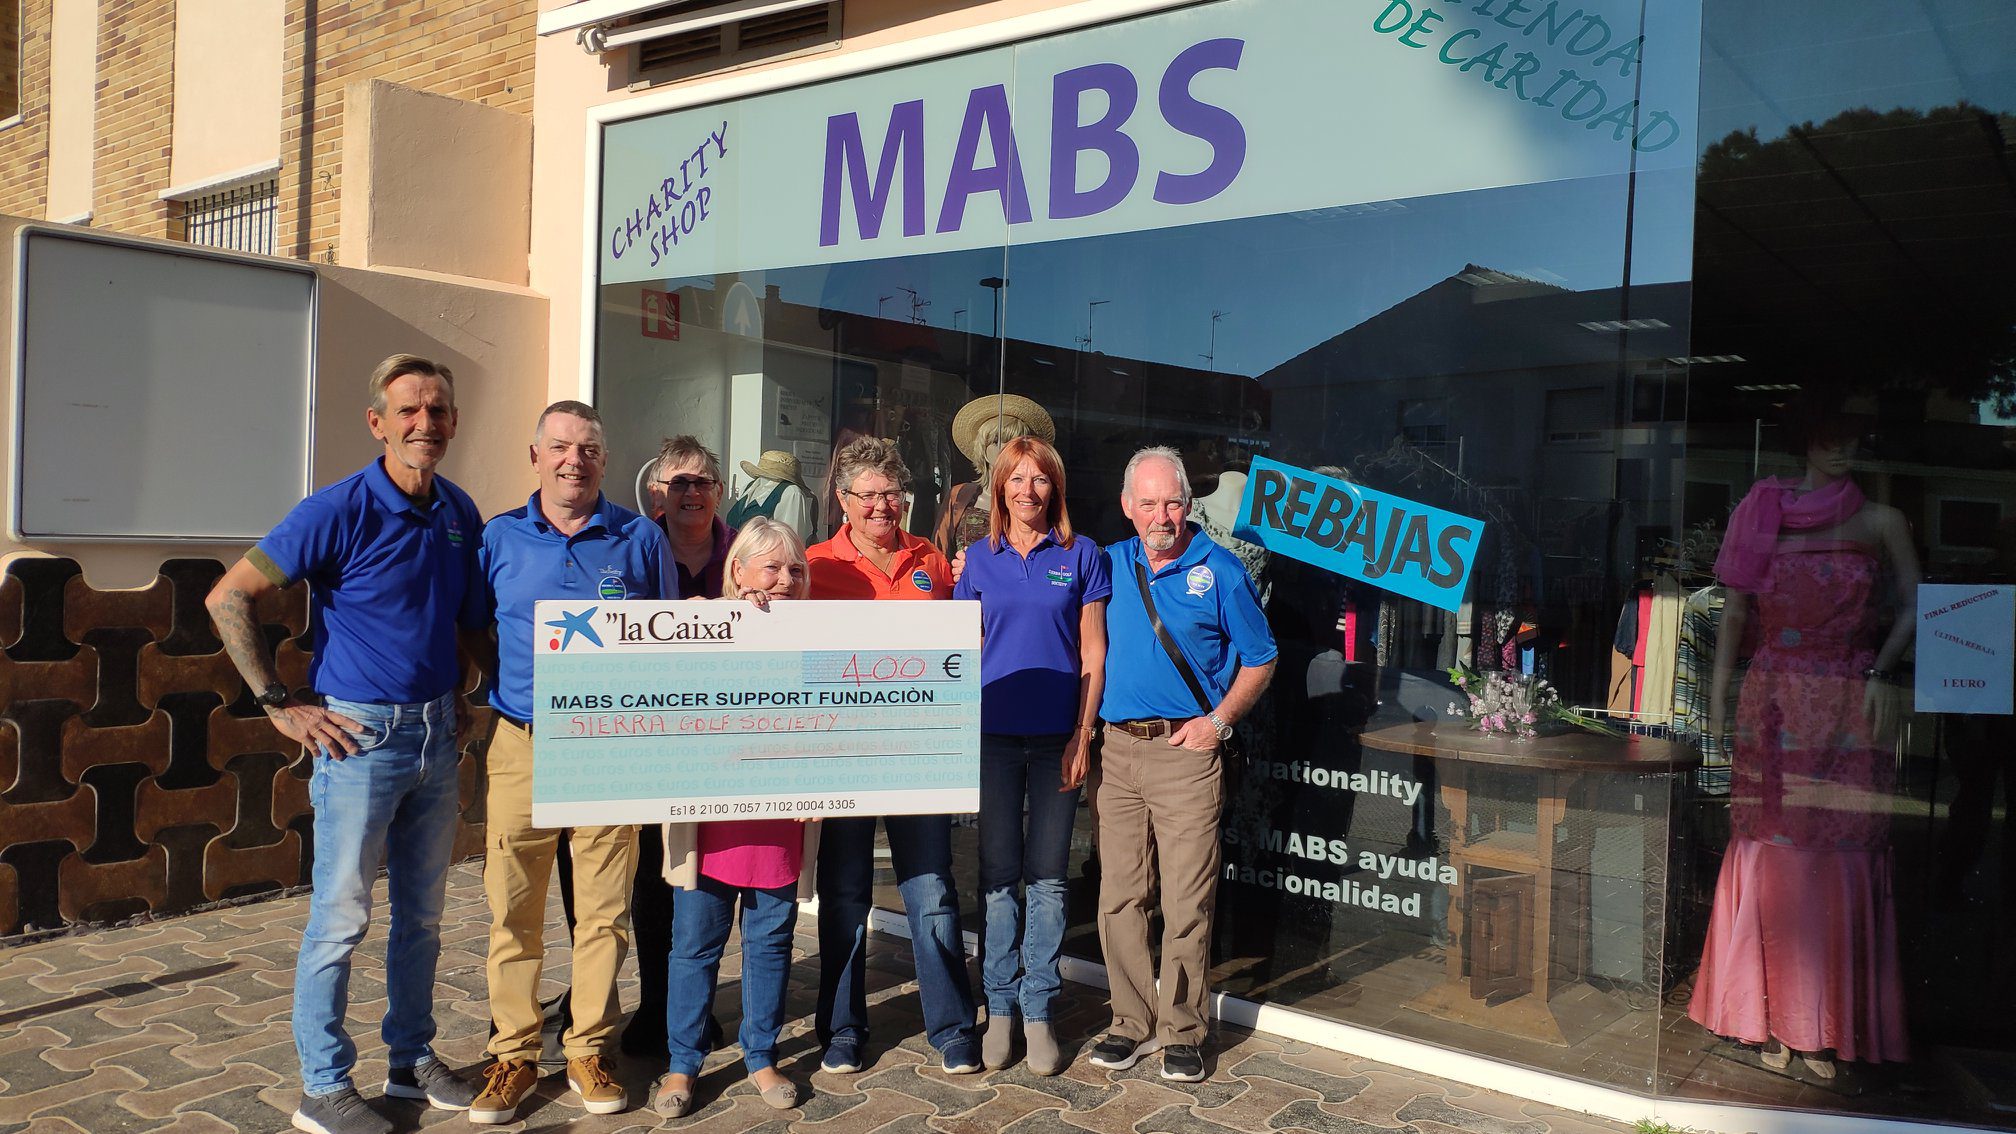 NEWS SIERRA GOLFERS GIVE TO MABS